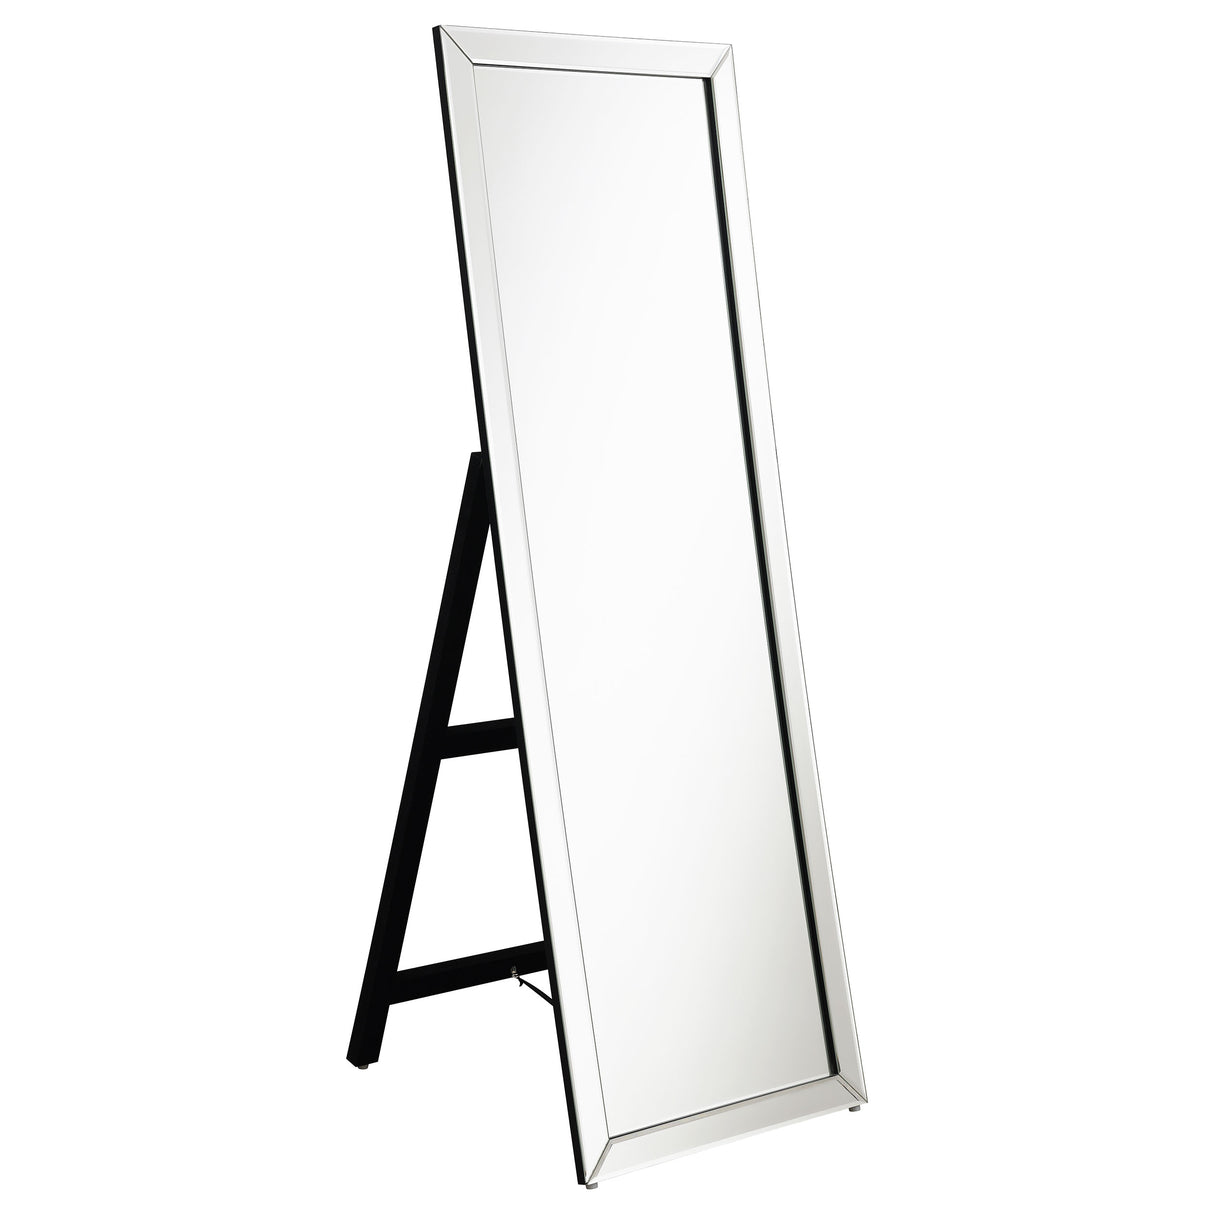 Standing Mirror - Soline Rectangle Cheval Mirror